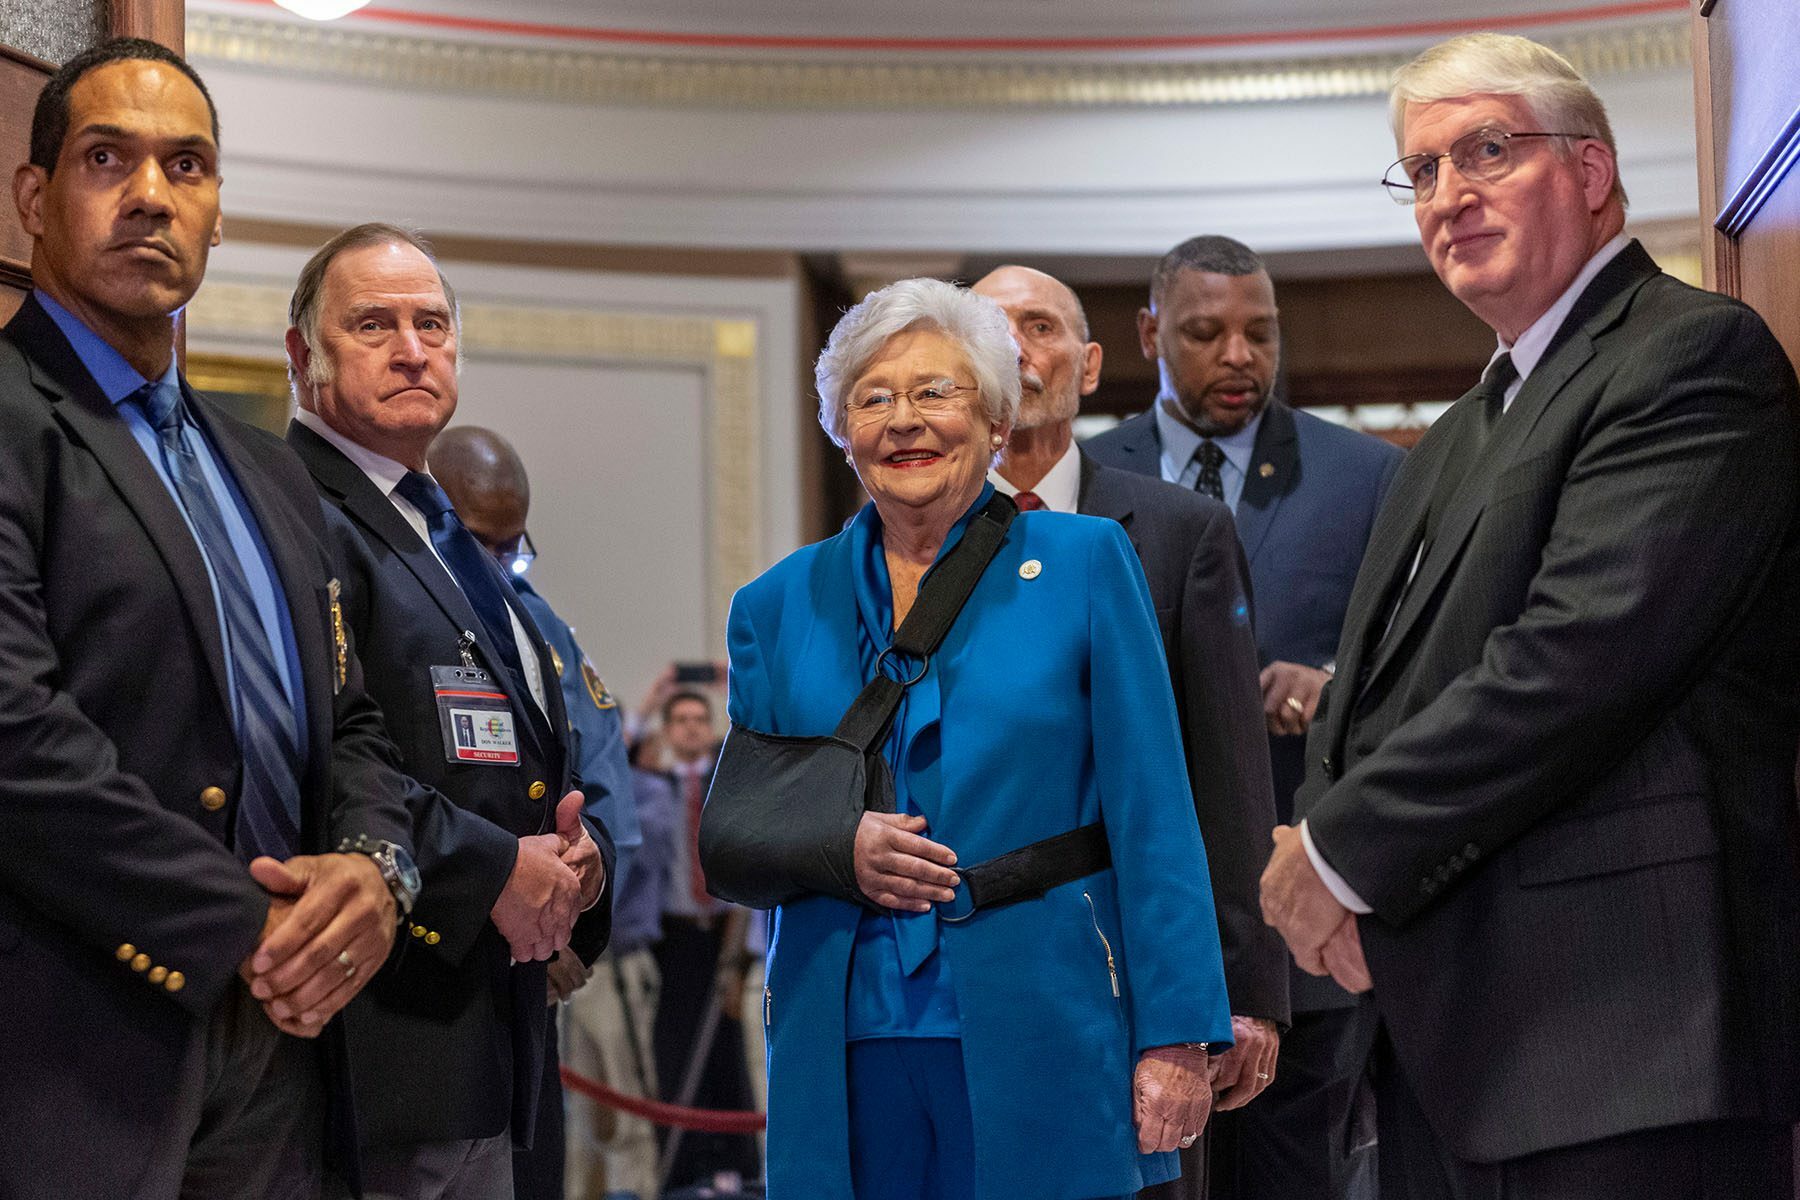 Gov. Kay Ivey wears a sling around her arm as she smiles before walking into the chamber. She is surrounded by several men.